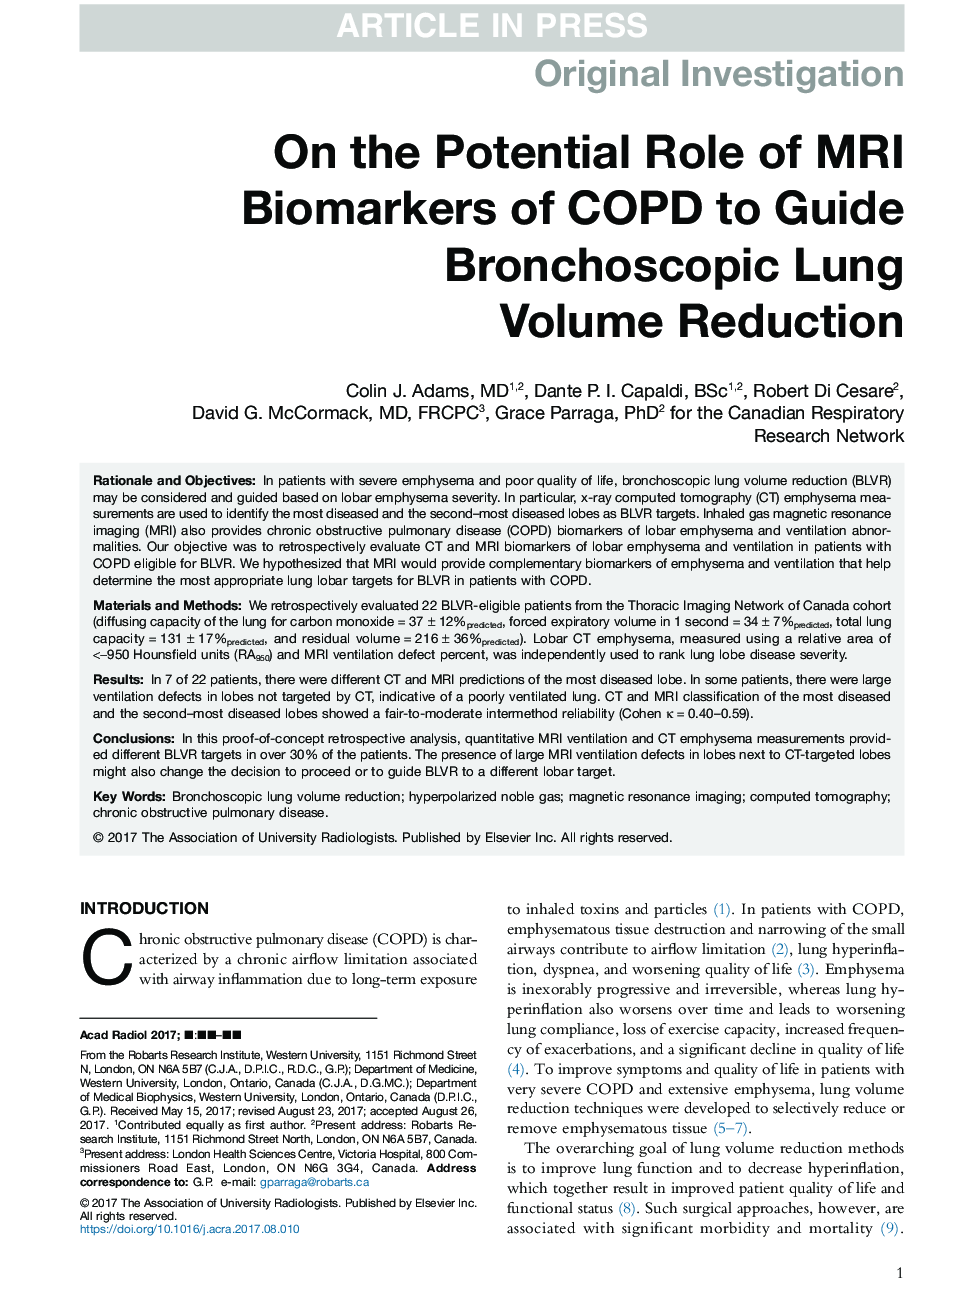 On the Potential Role of MRI Biomarkers of COPD to Guide Bronchoscopic Lung Volume Reduction